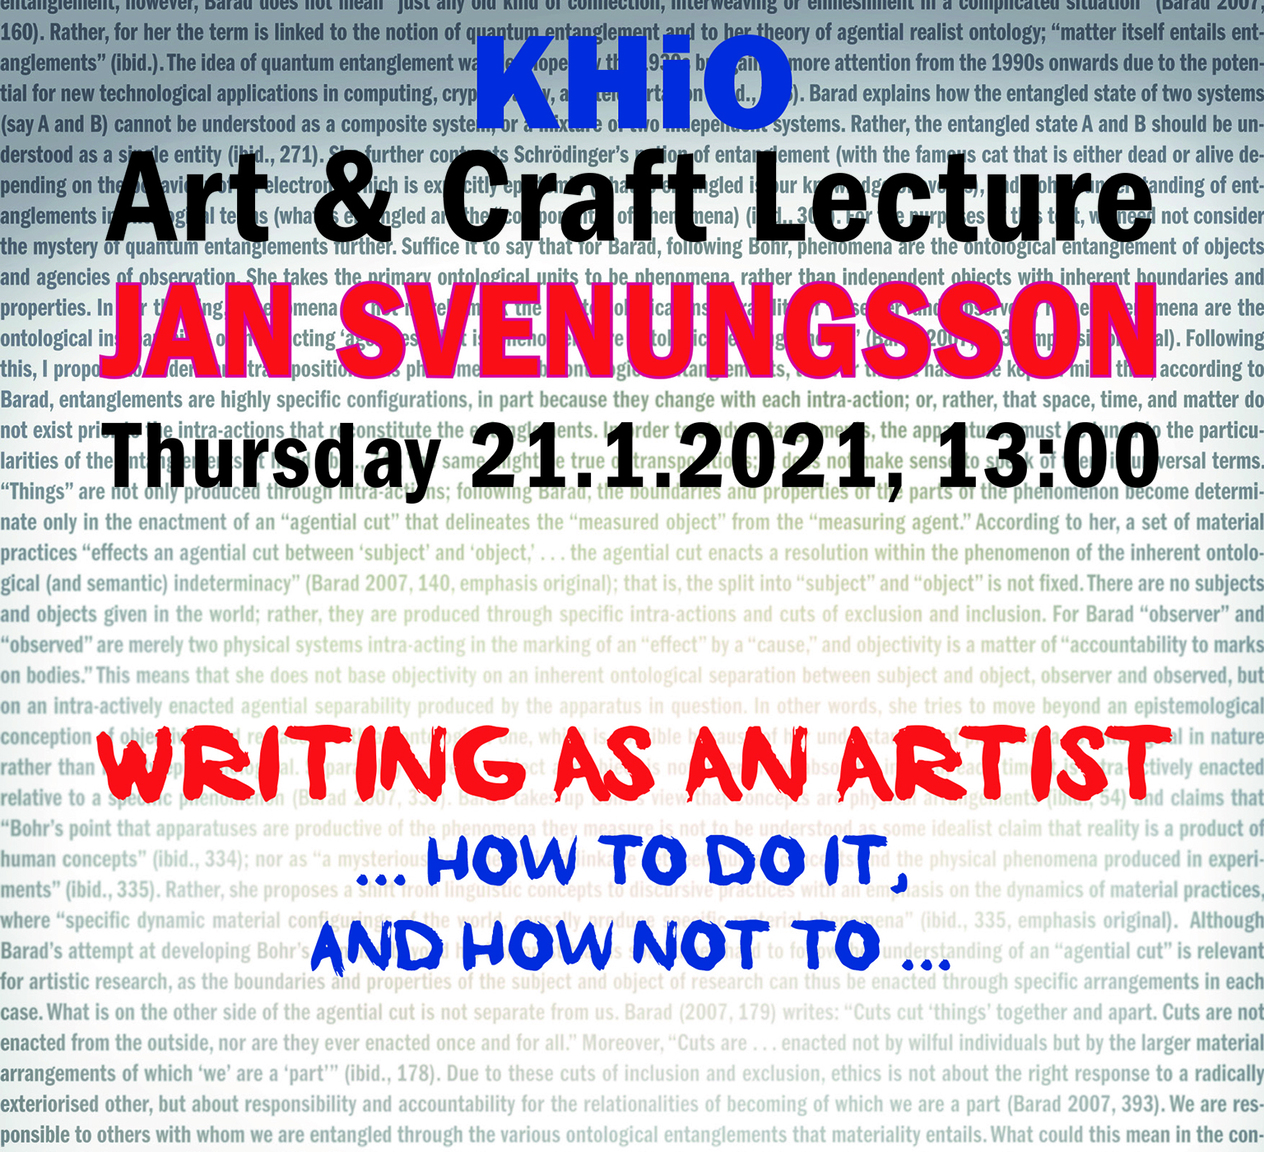 Art and Craft Lecture: Jan Svenungsson